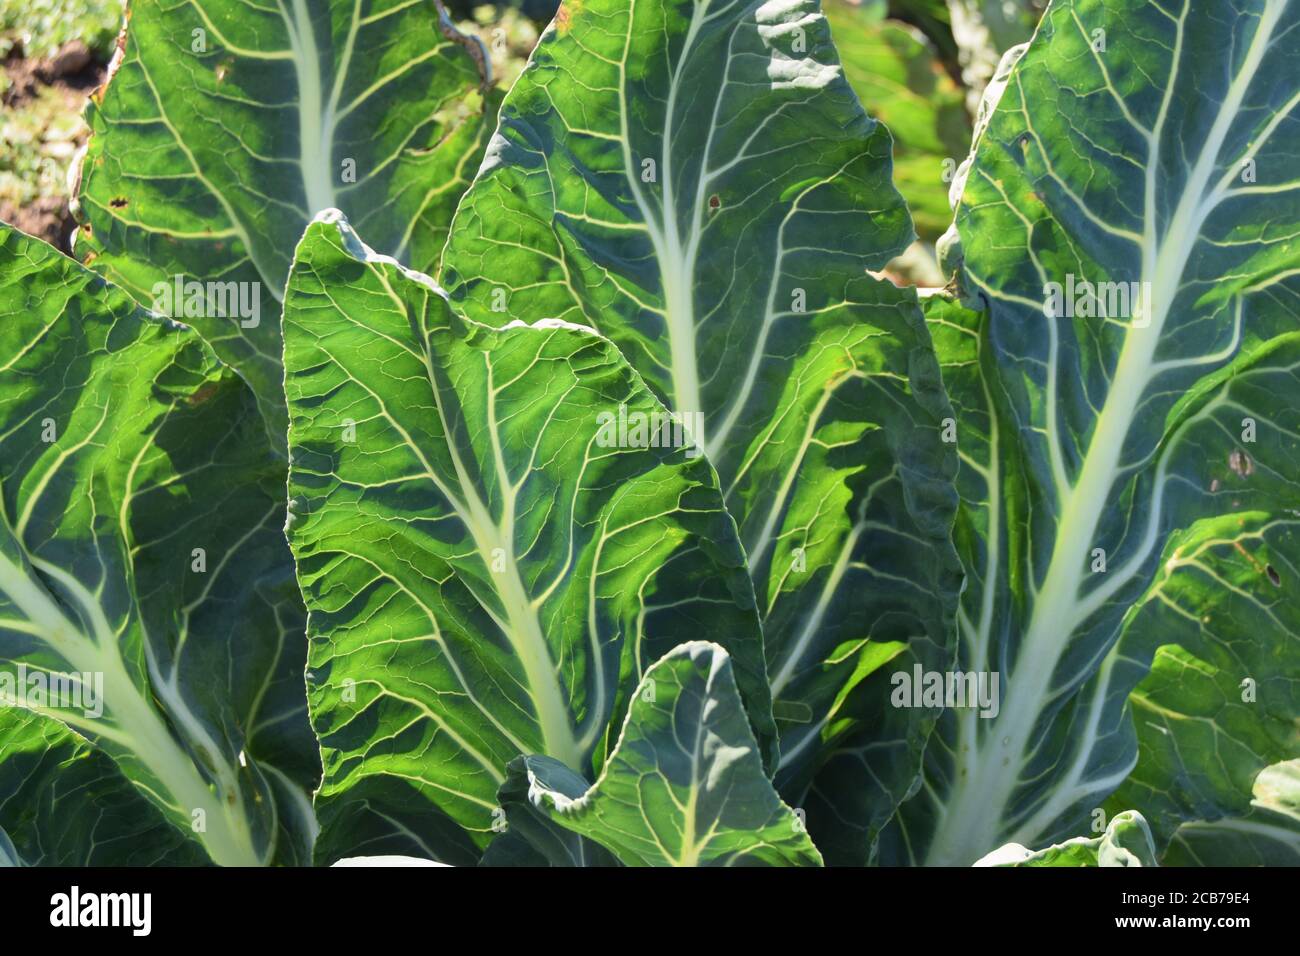 White Veined Leaves Stock Photo